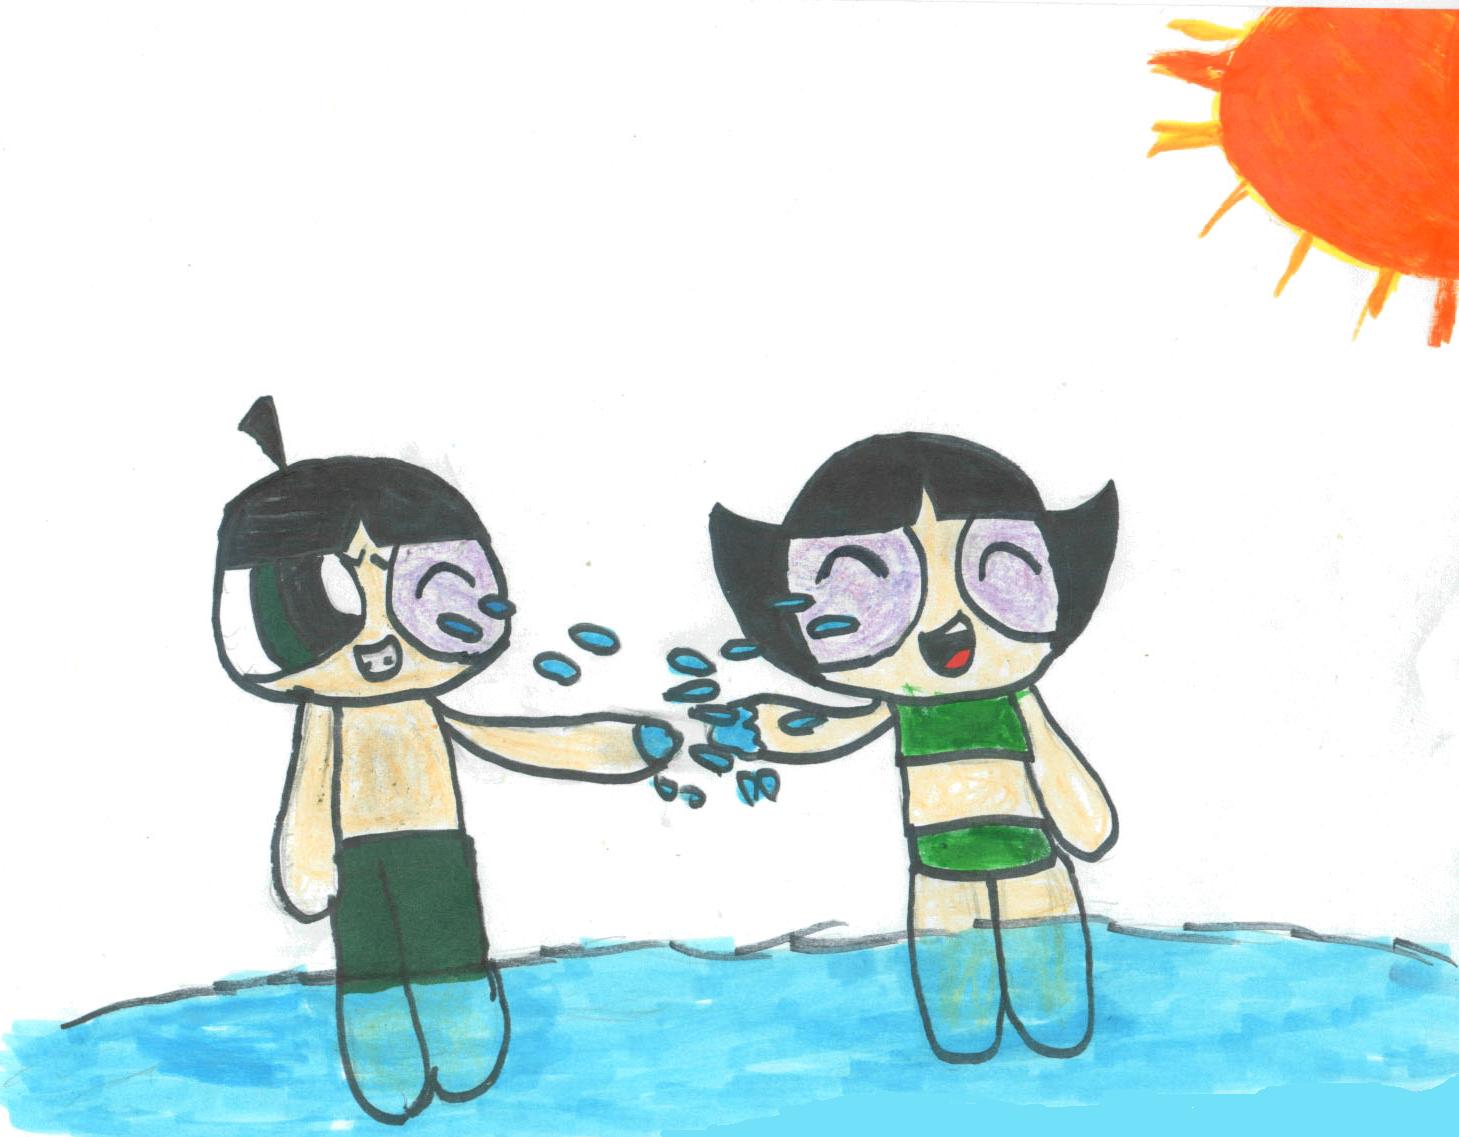 Butch and buttercup playing in the water by SSGoshin4